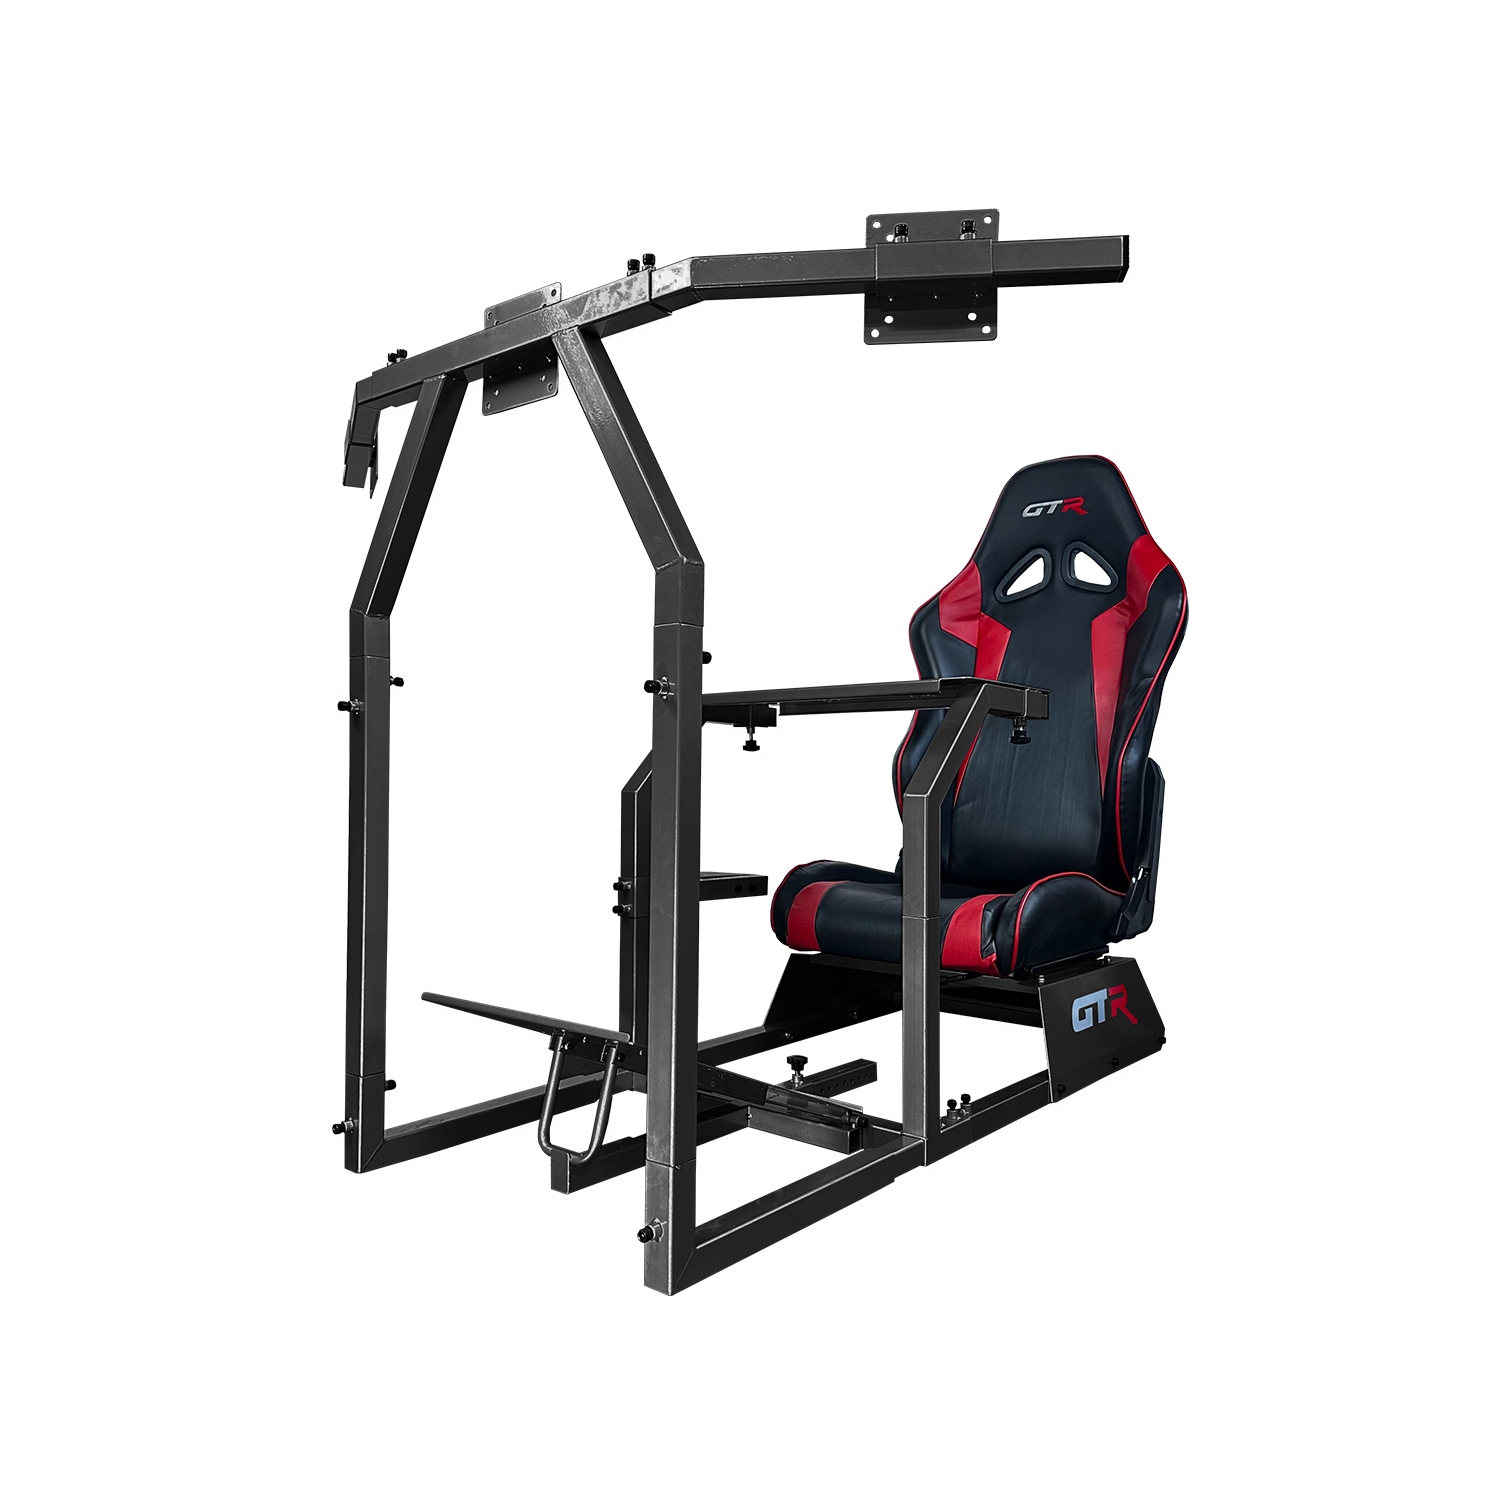 GTR Simulator GTA-F Model (Black) Triple or Single Monitor Stand with Black/Red Adjustable Leatherette Seat